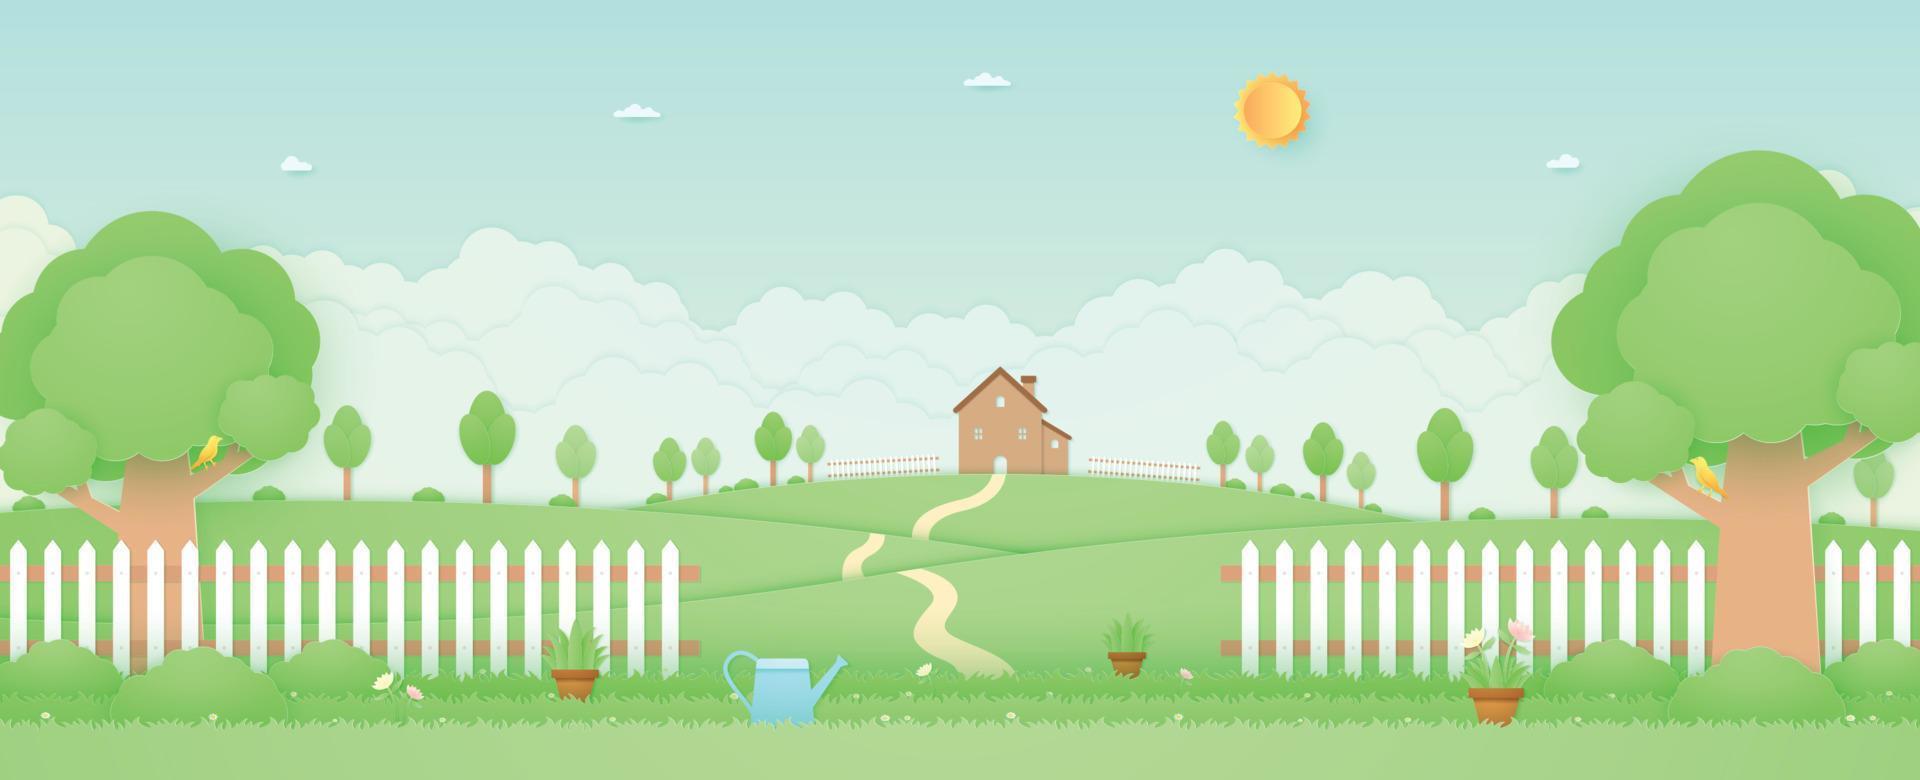 Spring Time, landscape, house on the hill, garden with trees, plant pots, beautiful flowers, watering can on grass and fence, bird on the branch, paper art style vector